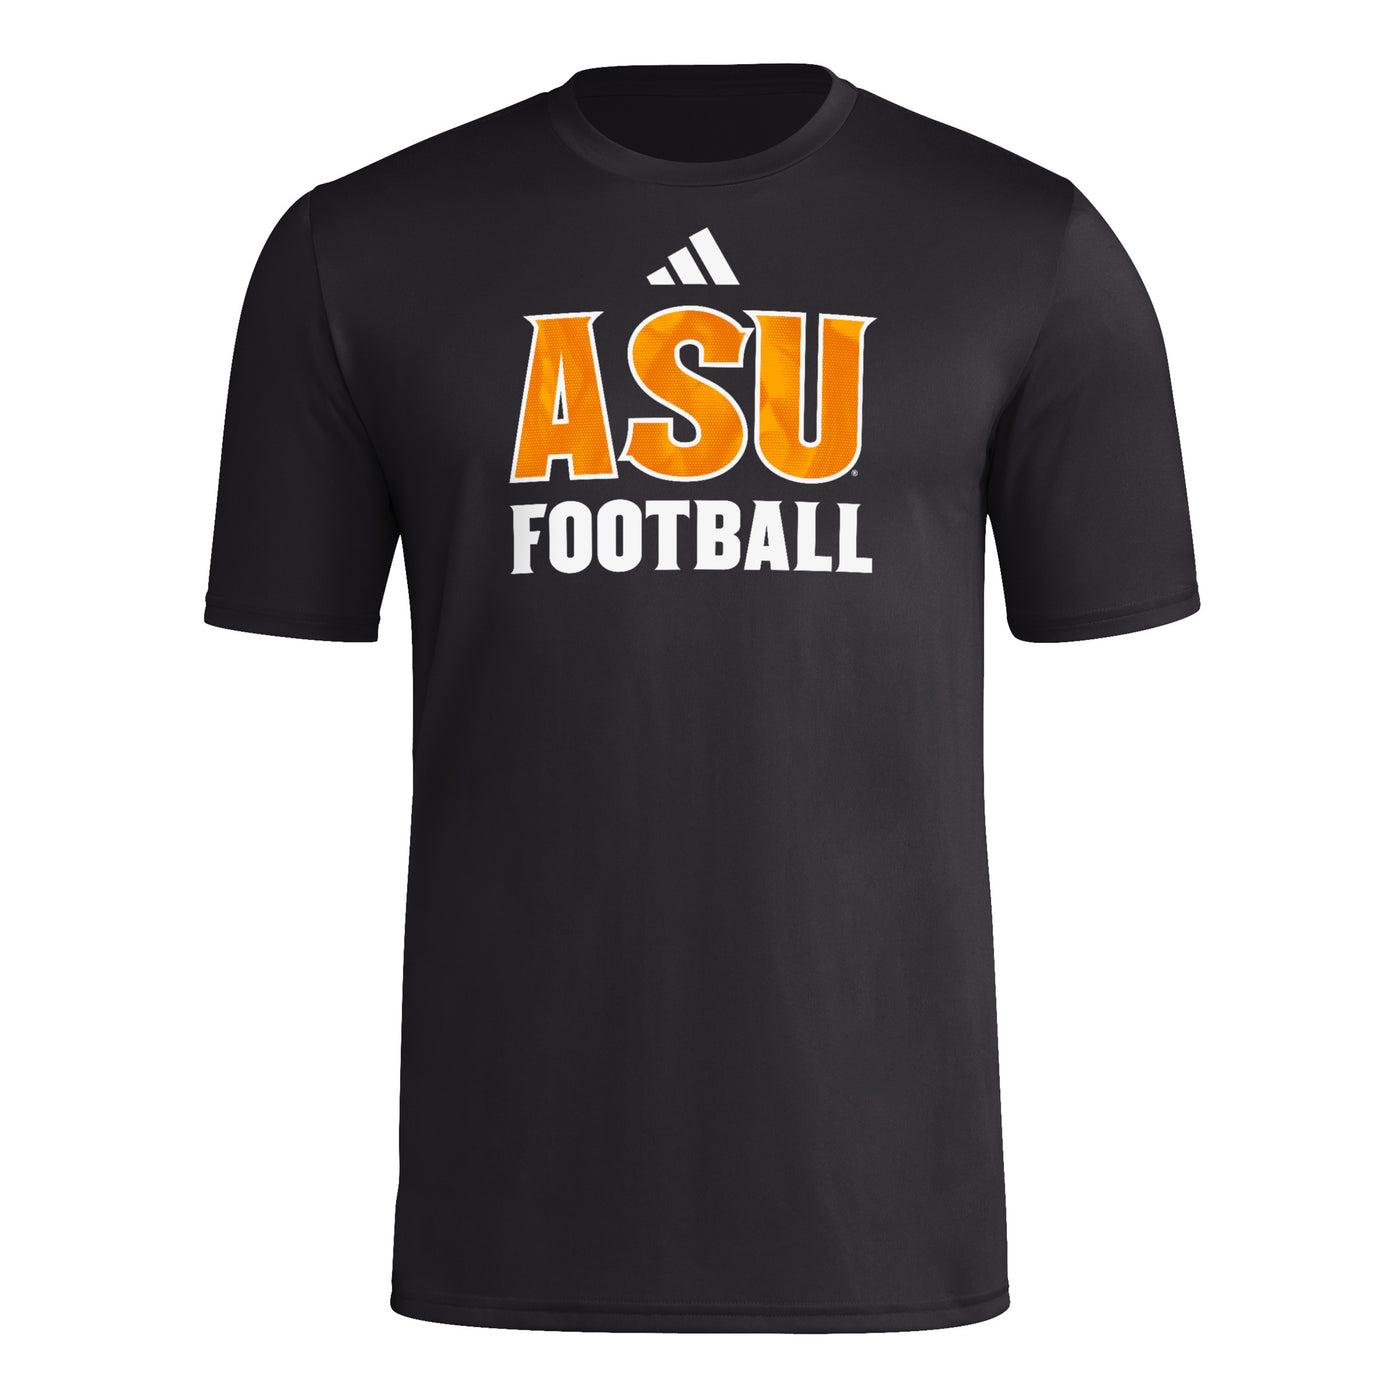 ASU Black Dry-fit T-shirt with the text 